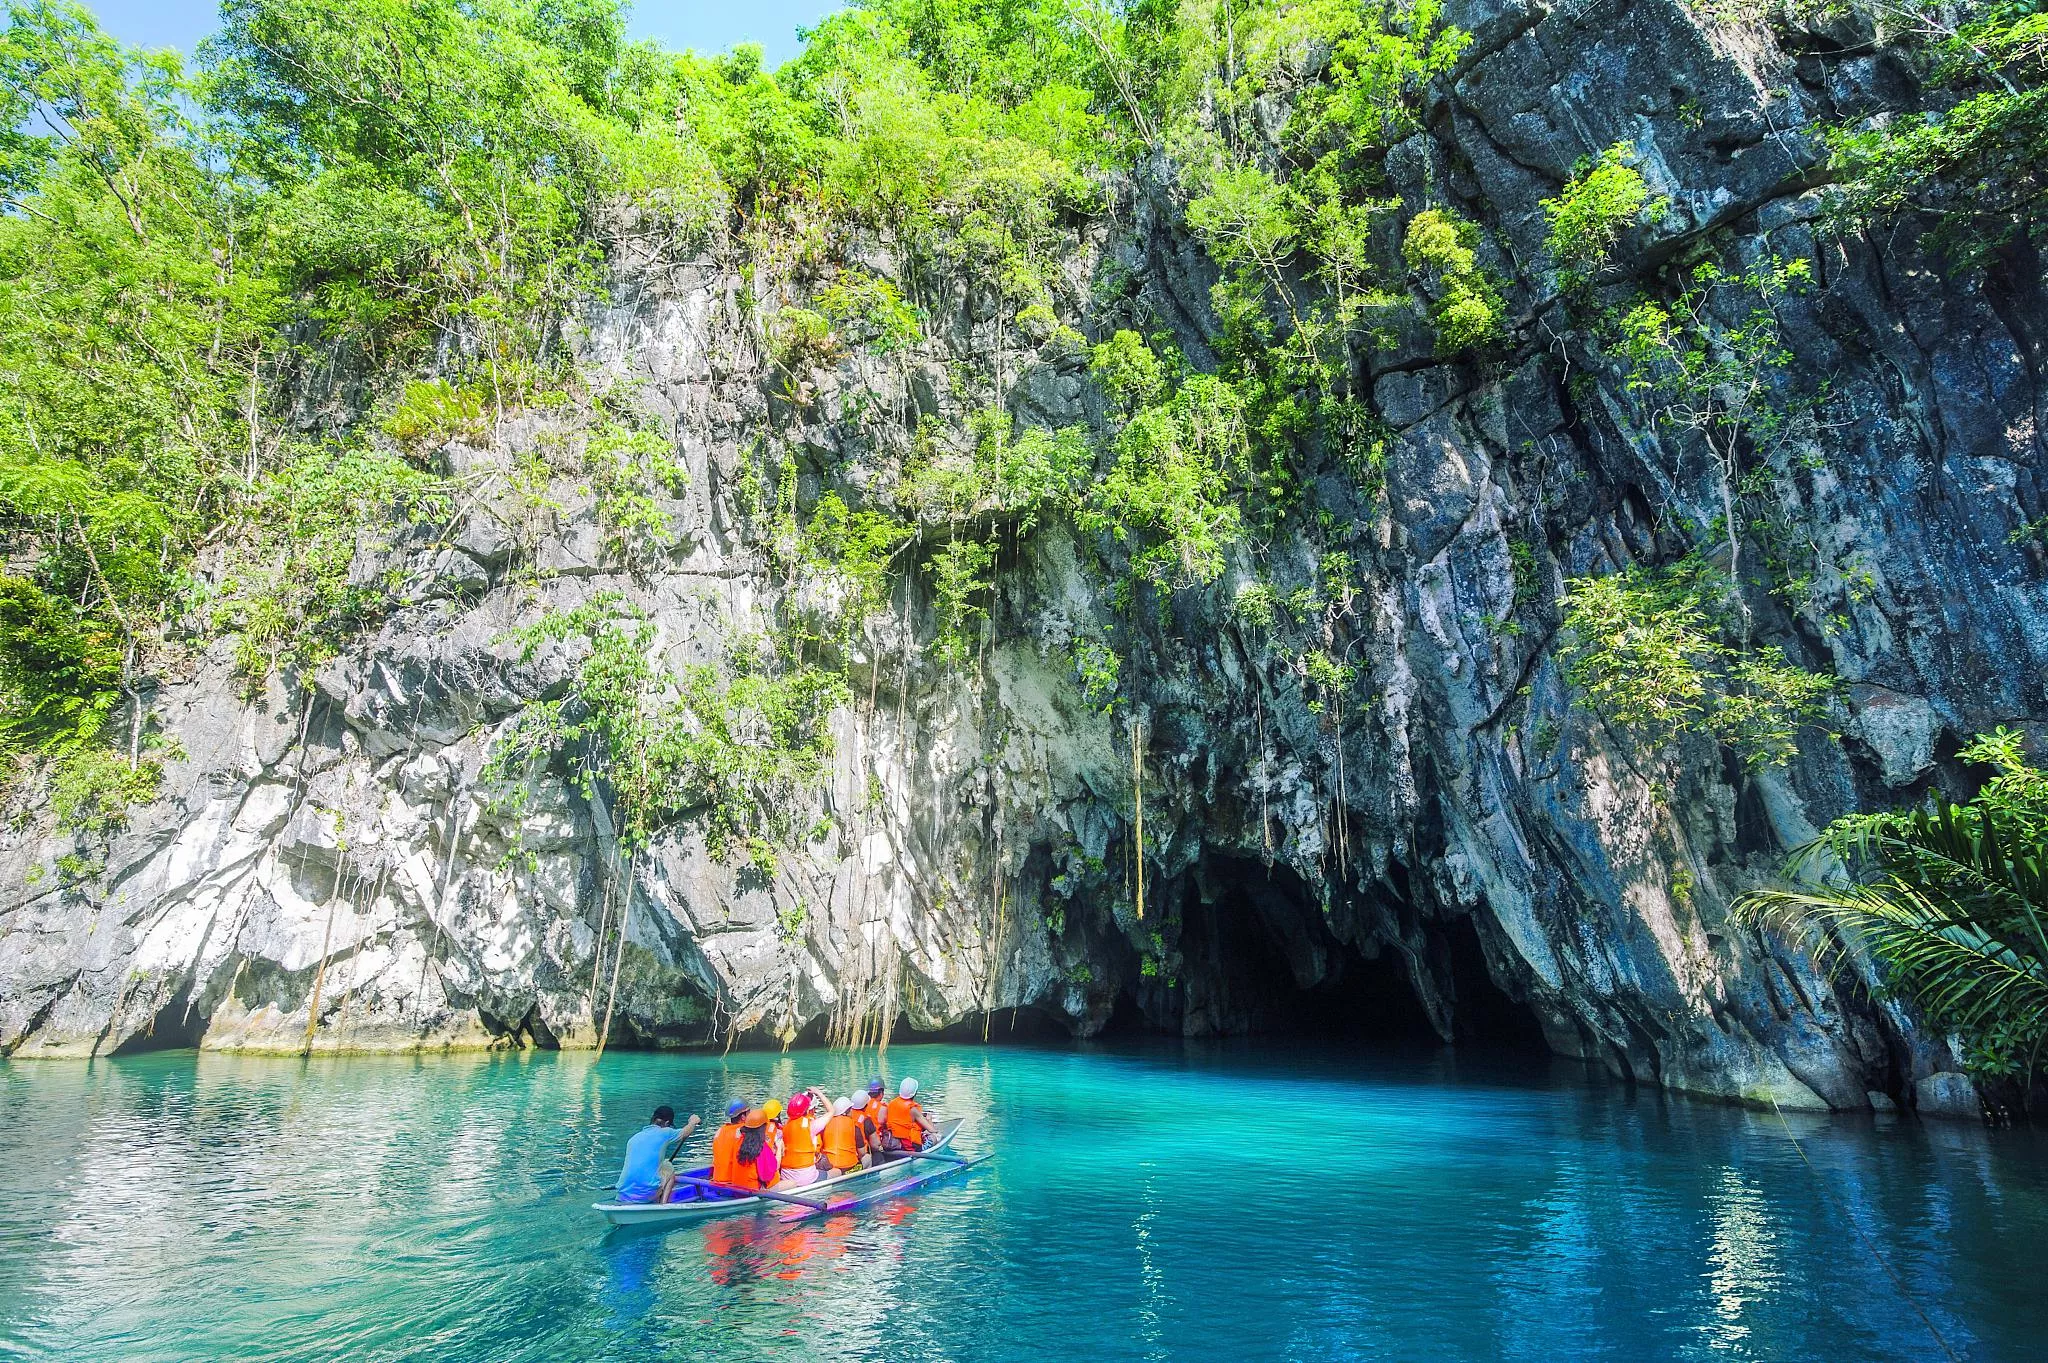 Puerto Princesa Subterranean River National Park in Philippines, Central Asia | Parks,Speleology - Rated 4